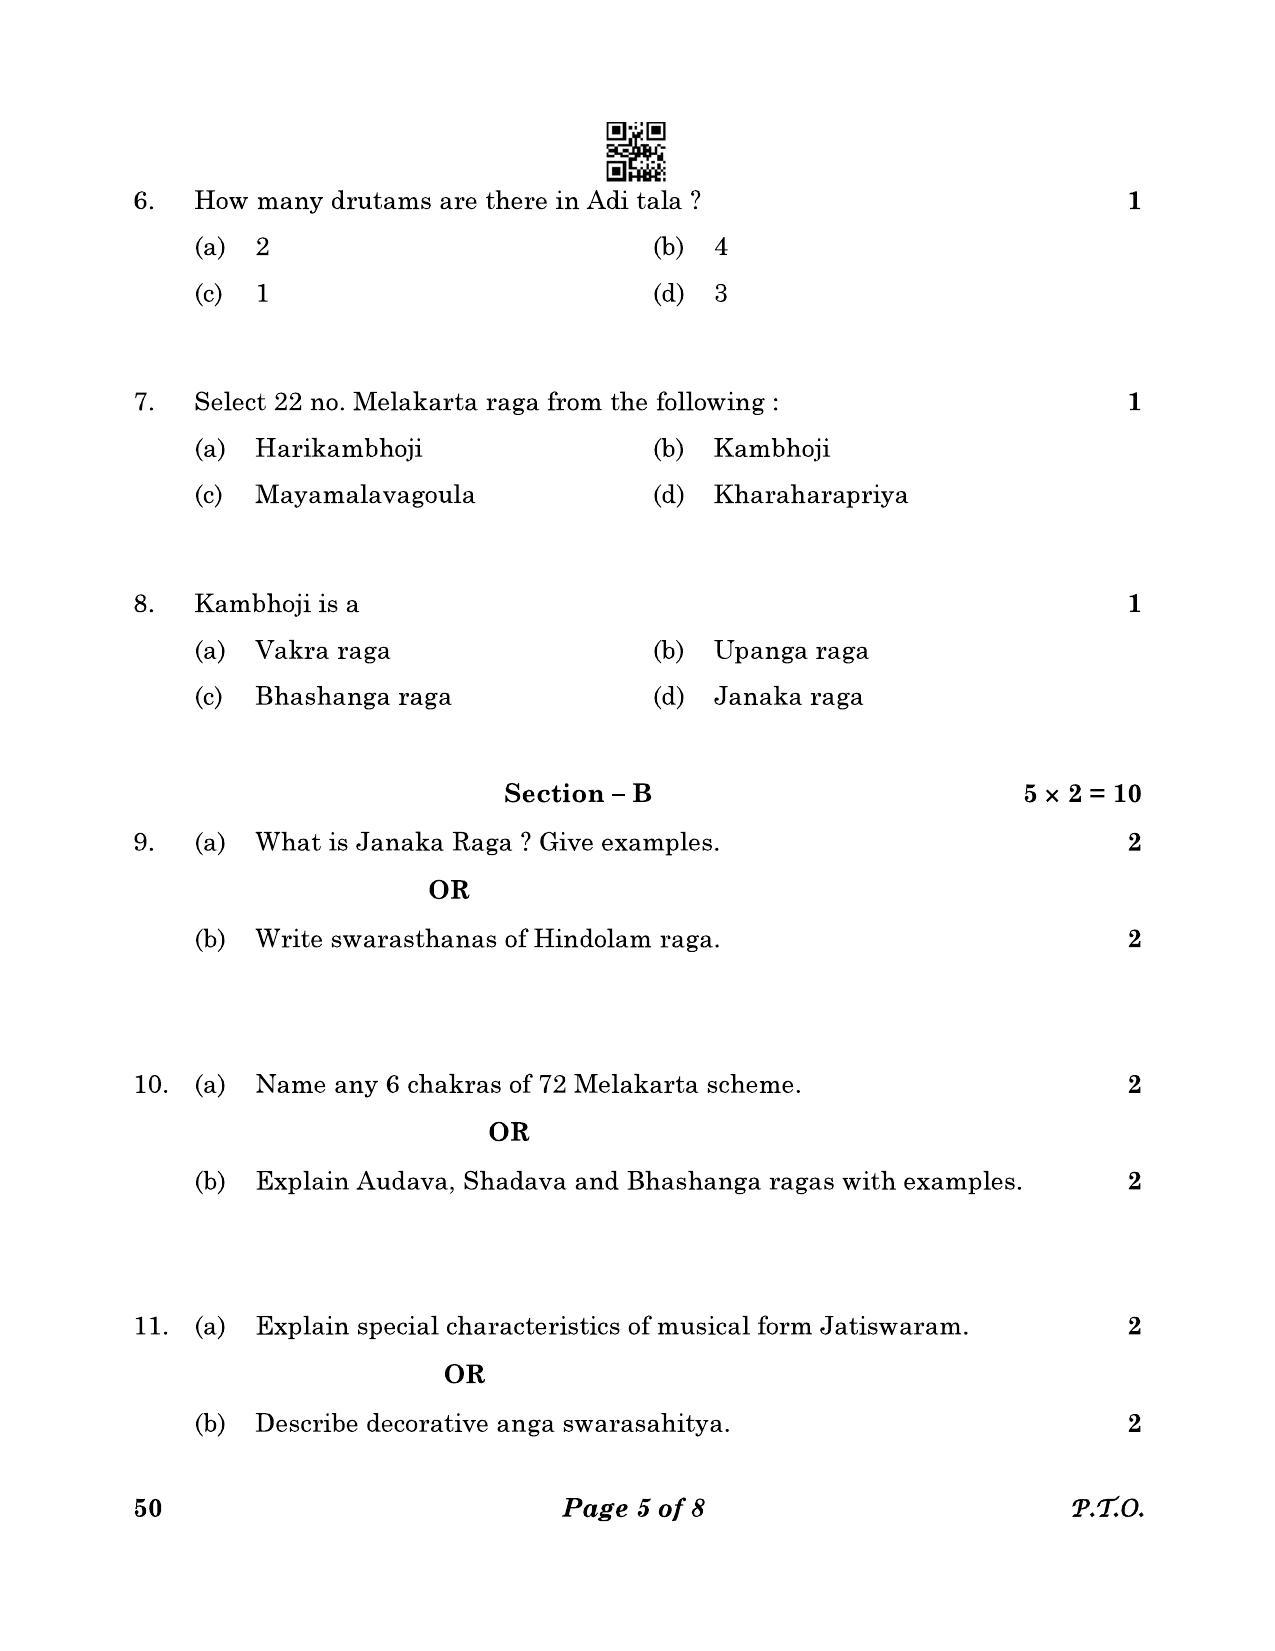 CBSE Class 10 50 CARNATIC MUSIC (Melodic Instruments) (Theory) 2023 Question Paper - Page 5